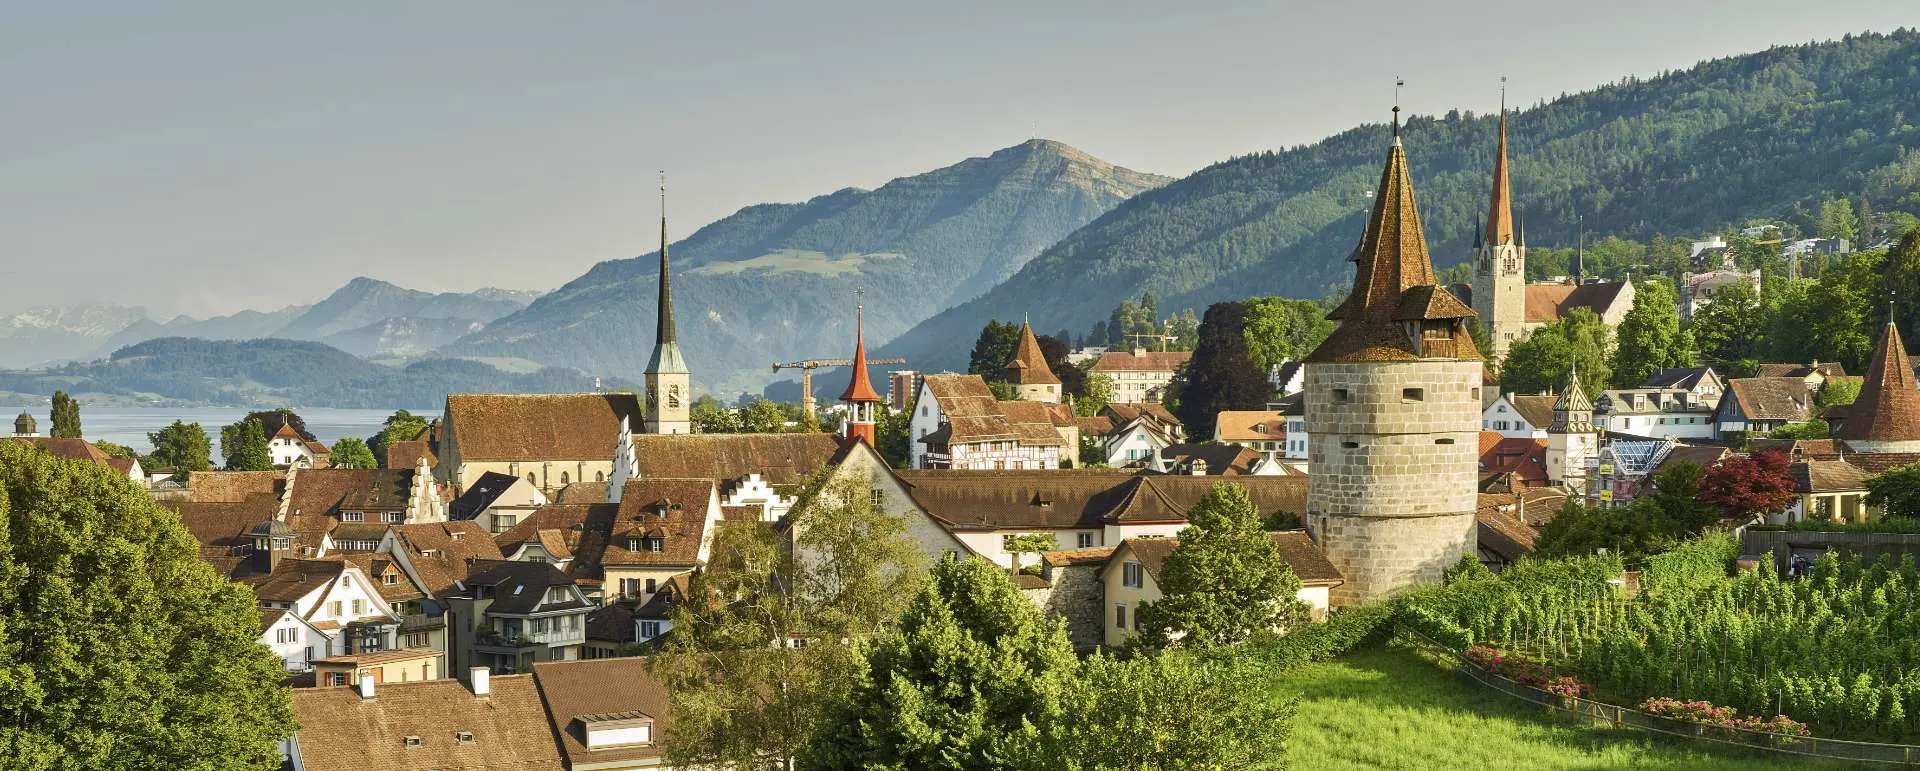 Zug - the destination for groups